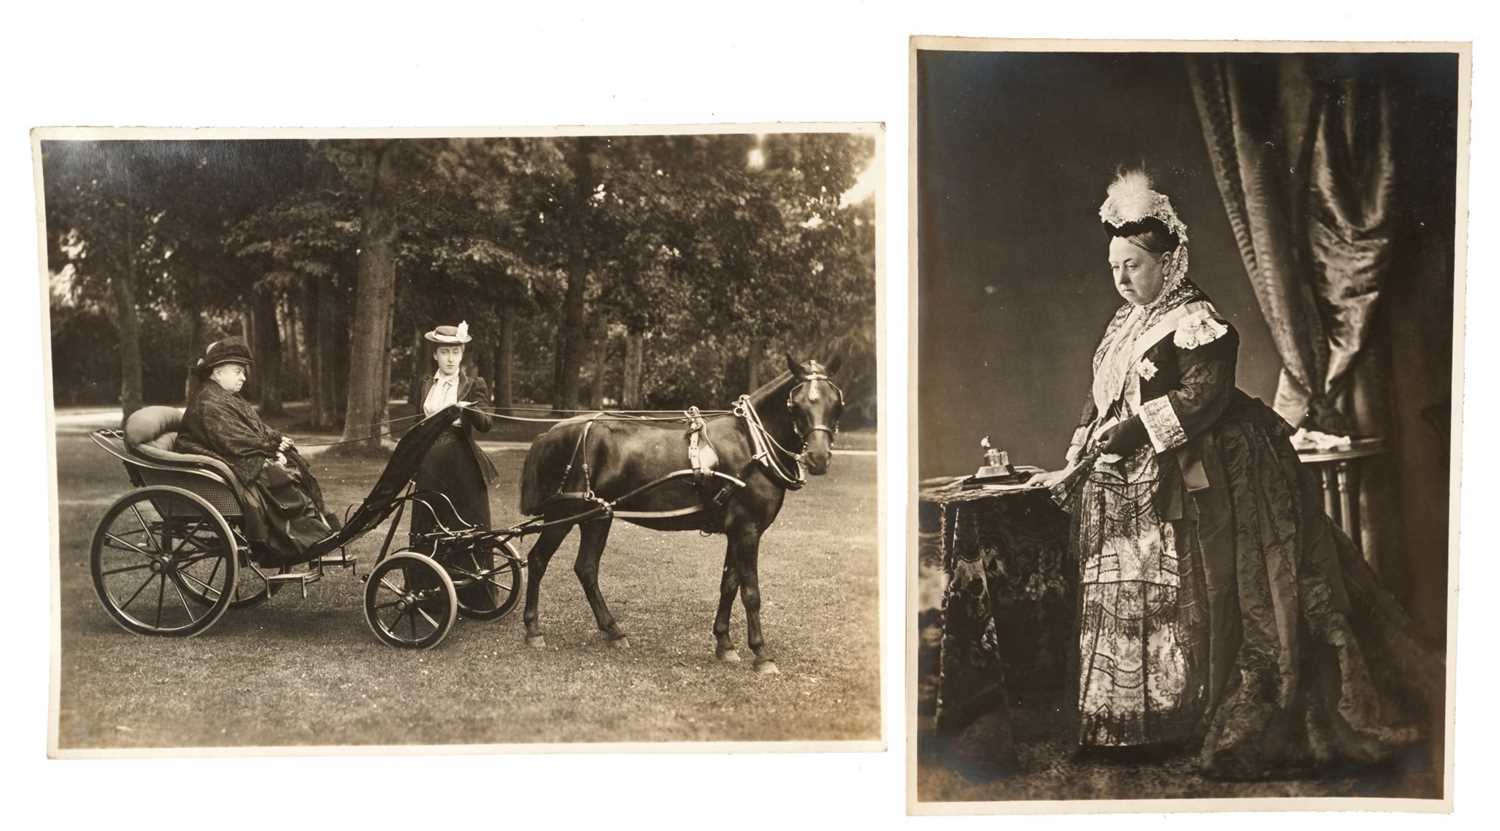 Lot 21 - H.M.Queen Victoria, fine silver gelatine photograph of the Queen in a pony cart with her daughter Princess Victoria of Schleswig-Holstein, inscribed and dated 29/7/92 on reverse with Russell & Sons...